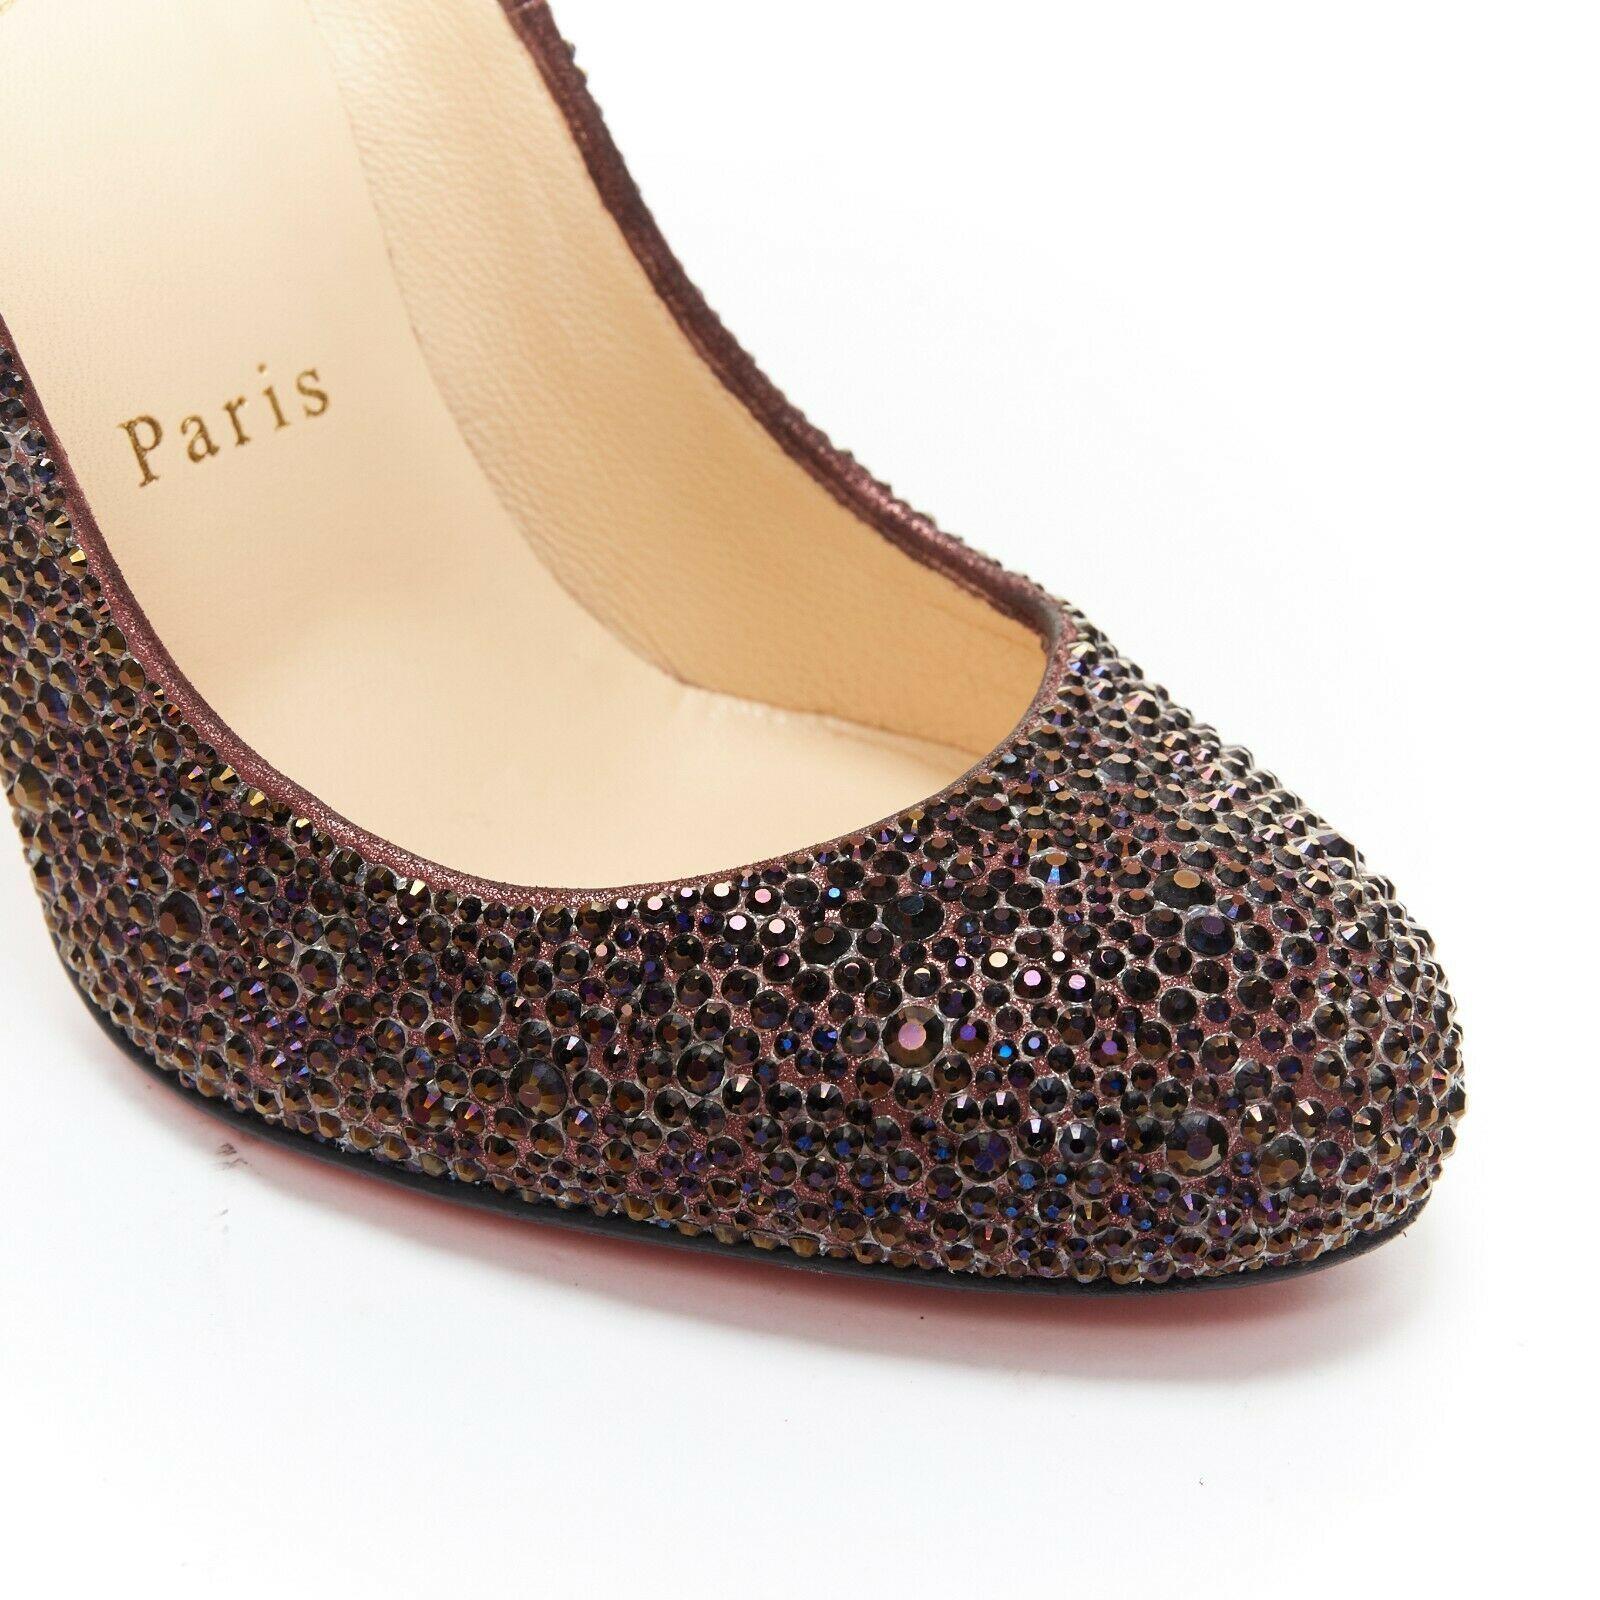 CHRISTIAN LOUBOUTIN Fifille 100 purple crystals embellished high heel pumps EU35
CHRISTIAN LOUBOUTIN
Style Fifille 100. Embellished with dark purple crystals. Round toe front. High heel pumps. 
Signature Christian Louboutin red bottom sole. Tan